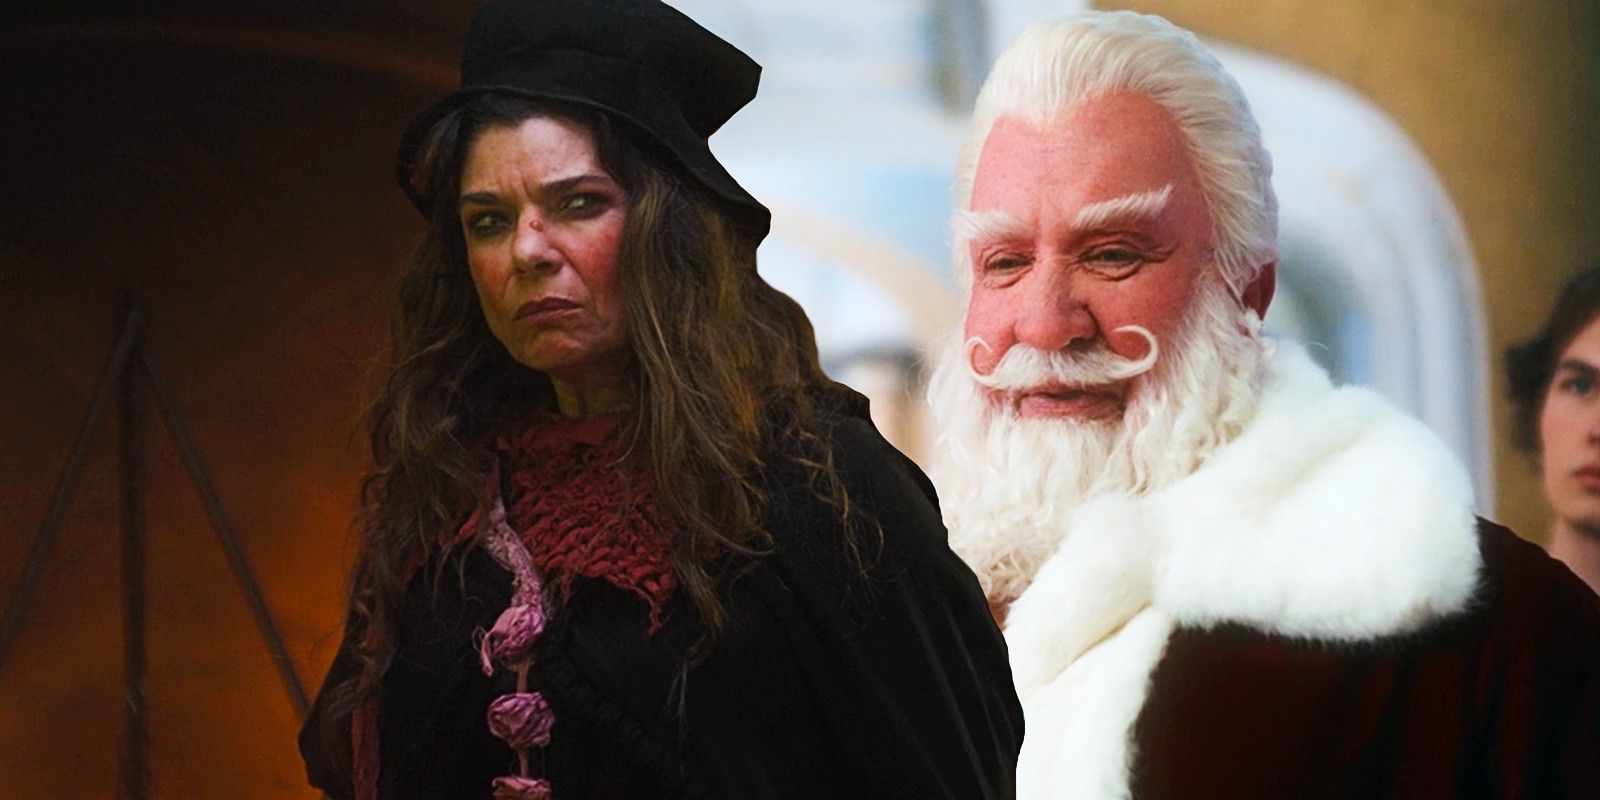 Laura San Giacomo as the Christmas Witch and Tim Allen as Santa Claus in The Santa Clauses